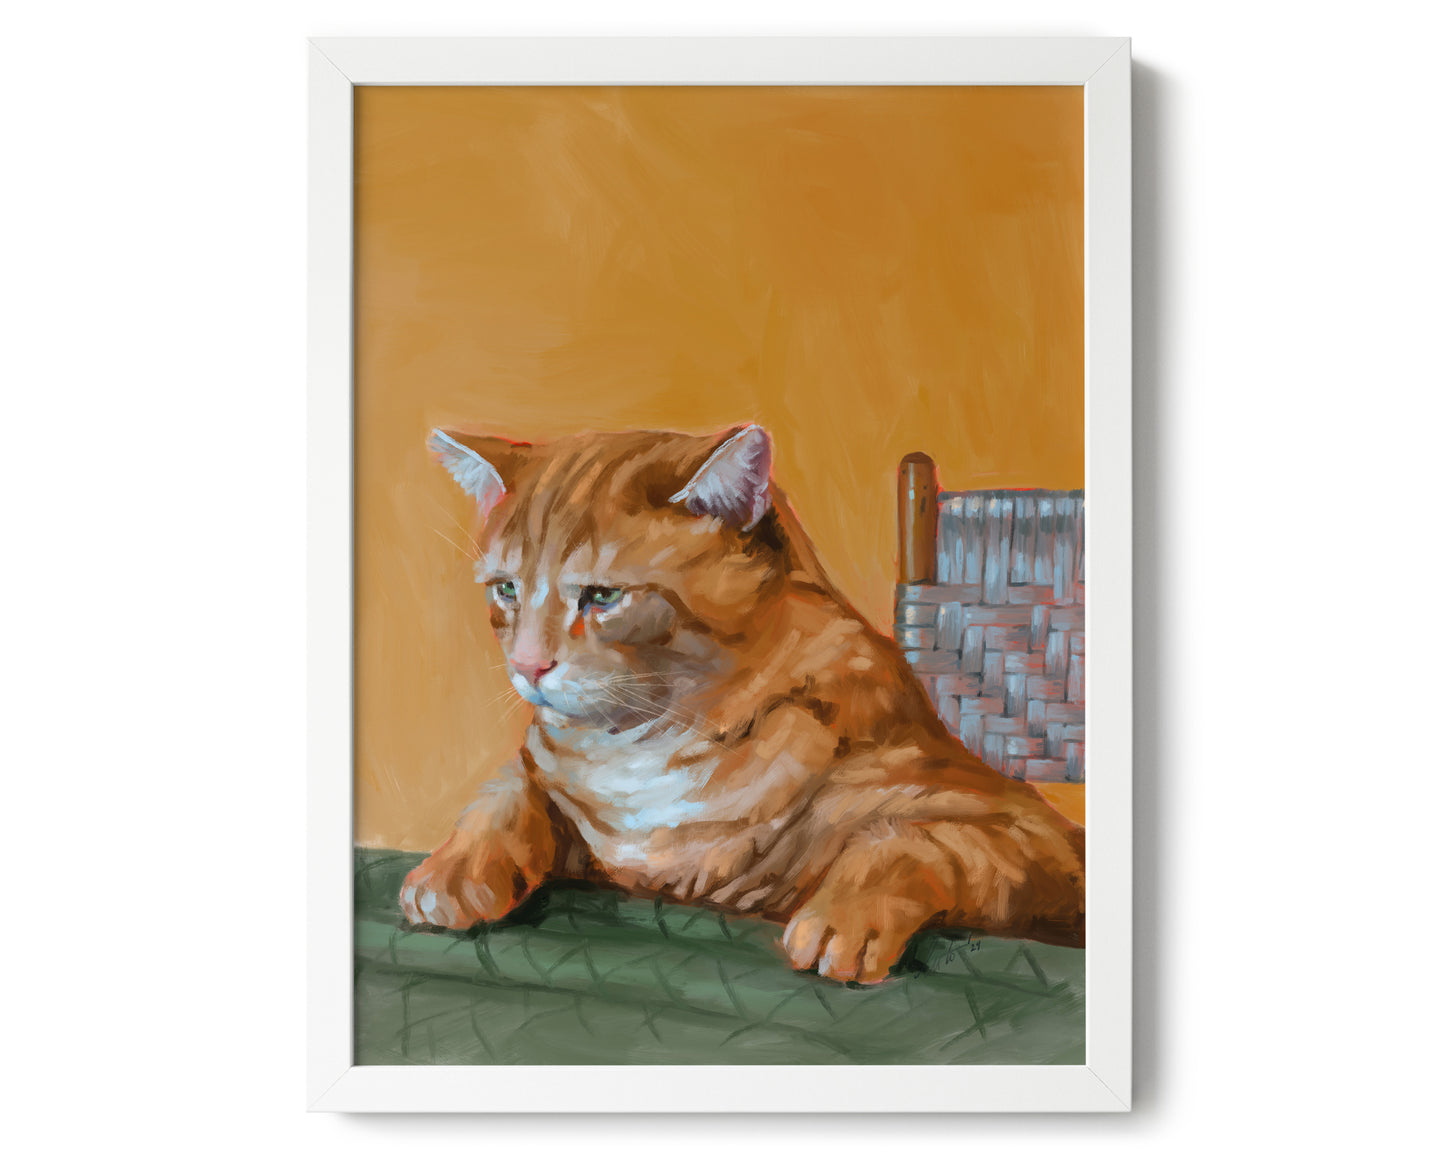 "Patapon" by Catherine Hébert - Orange Tabby Cat At The Dinner Table Art Print - 12"x16" size